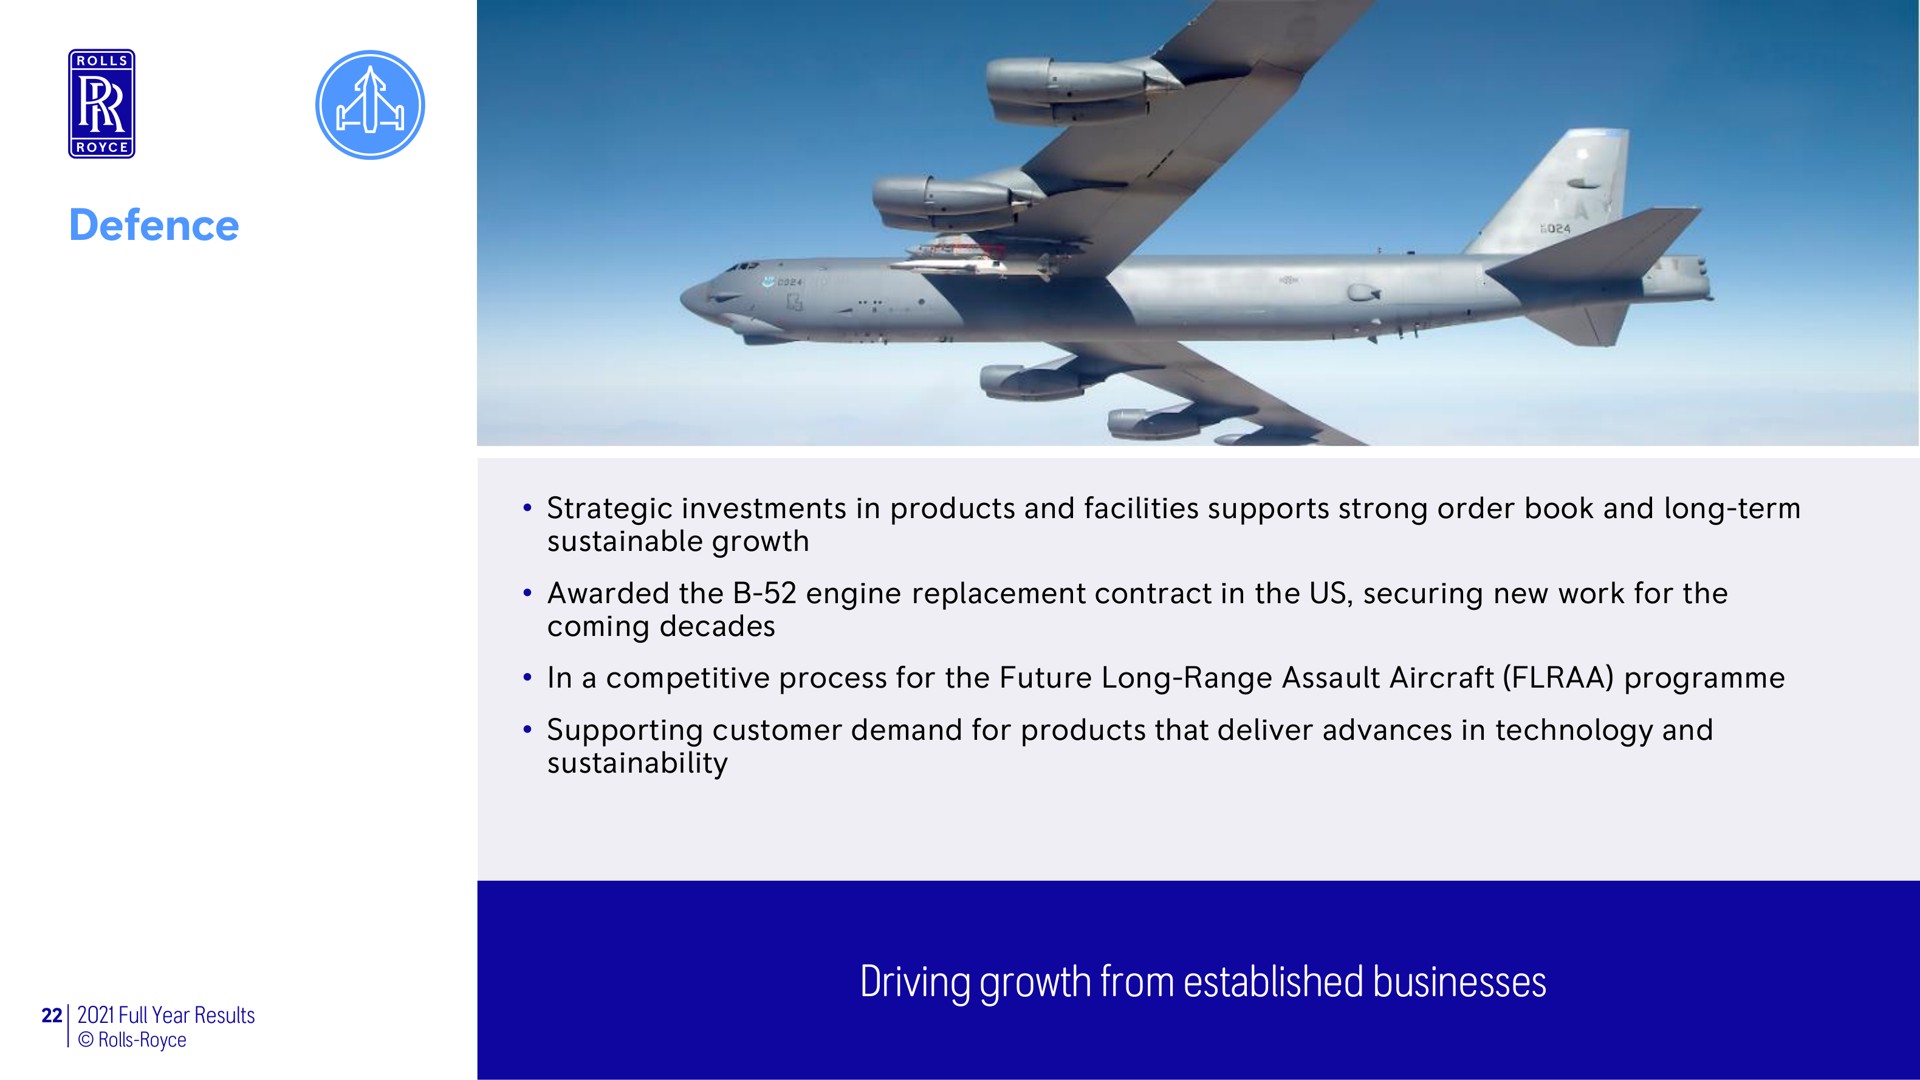 defence driving growth from established businesses | Rolls-Royce Holdings